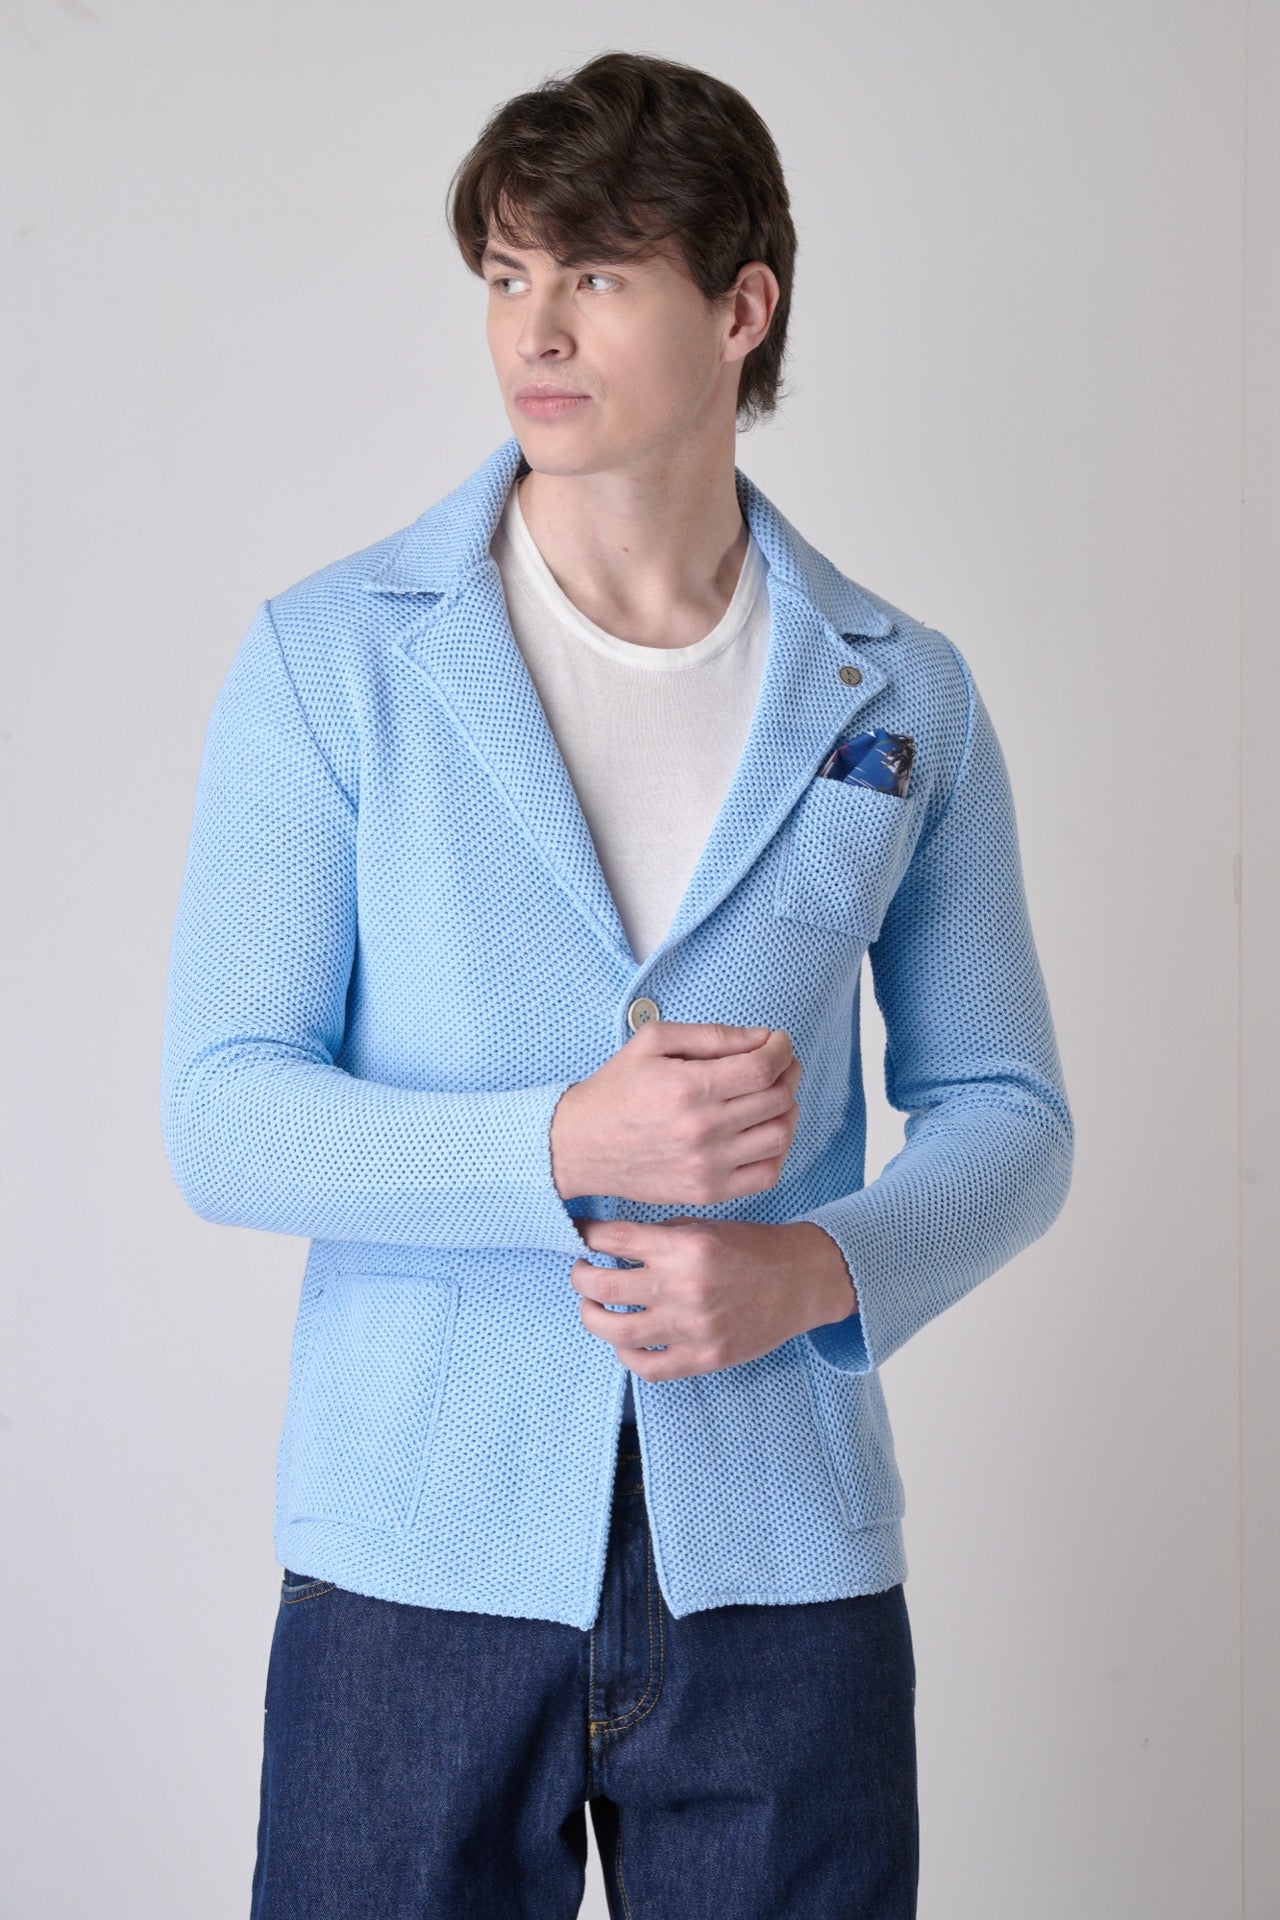 Blue Partridge Eye Single-breasted Jacket with inner collar and pocket square in V2 fabric